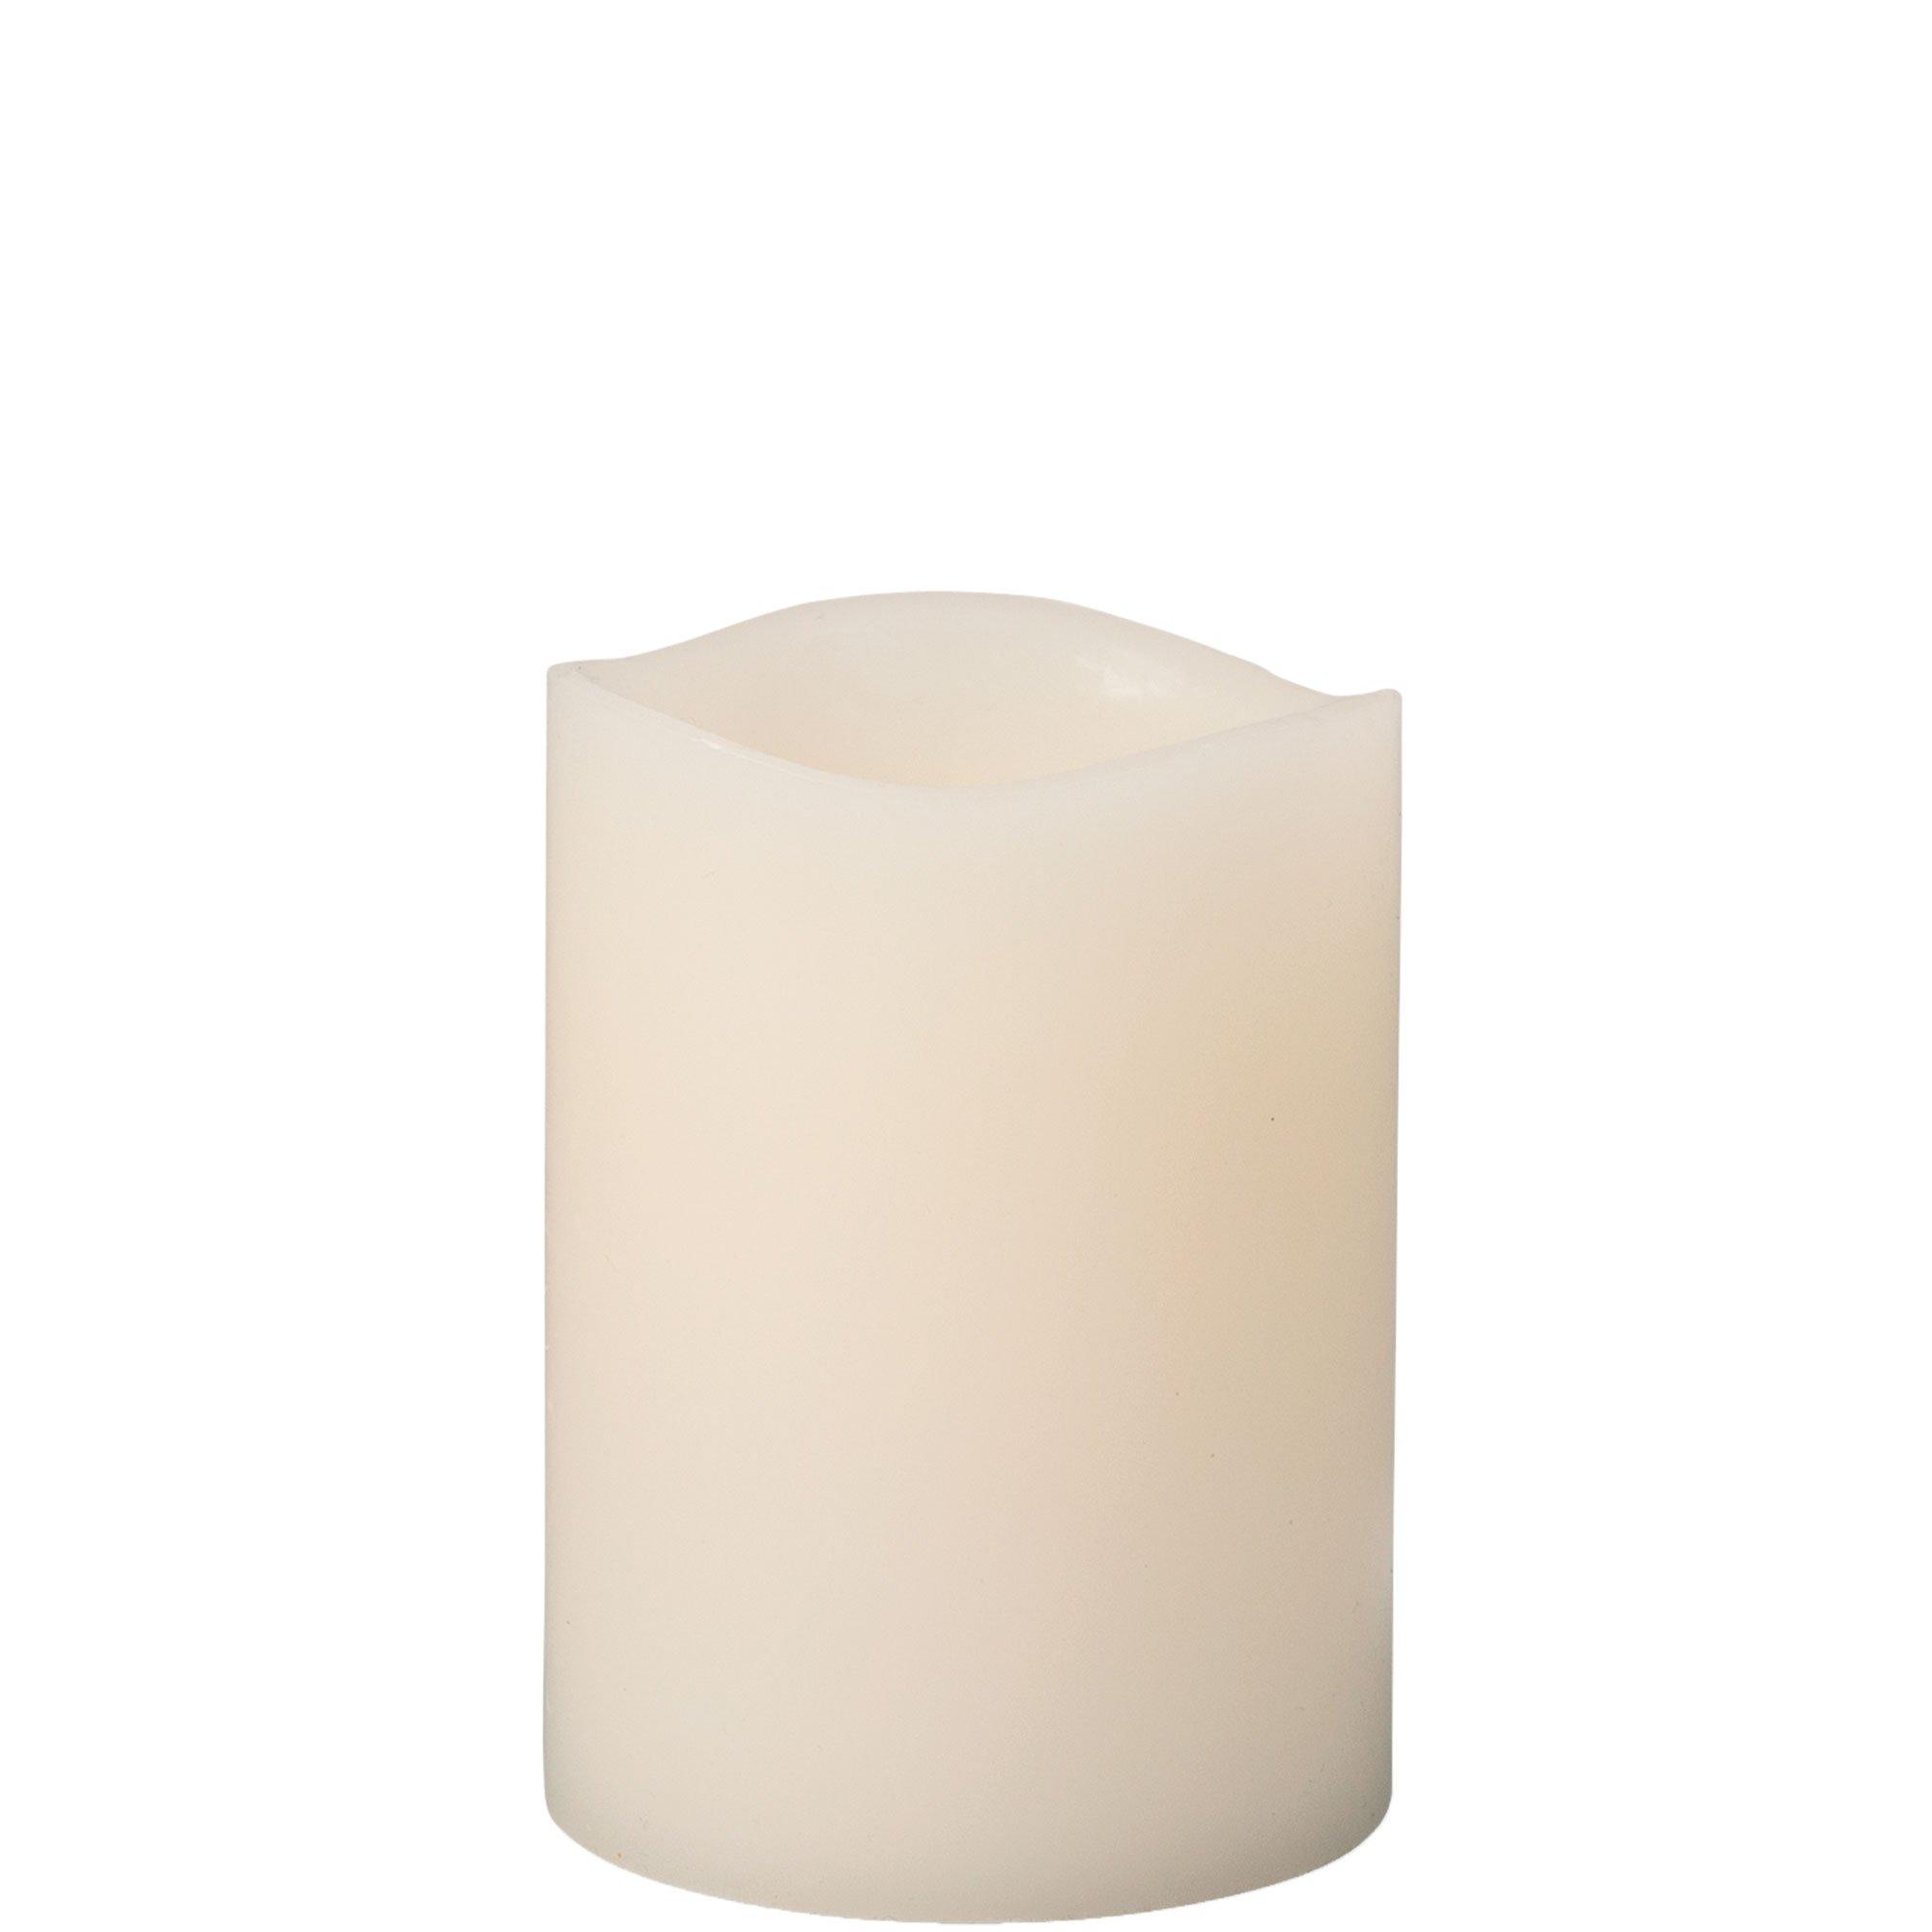 Vanilla-Scented White Pillar Glow Wick Flameless LED Wax Candle, 3in x 4in